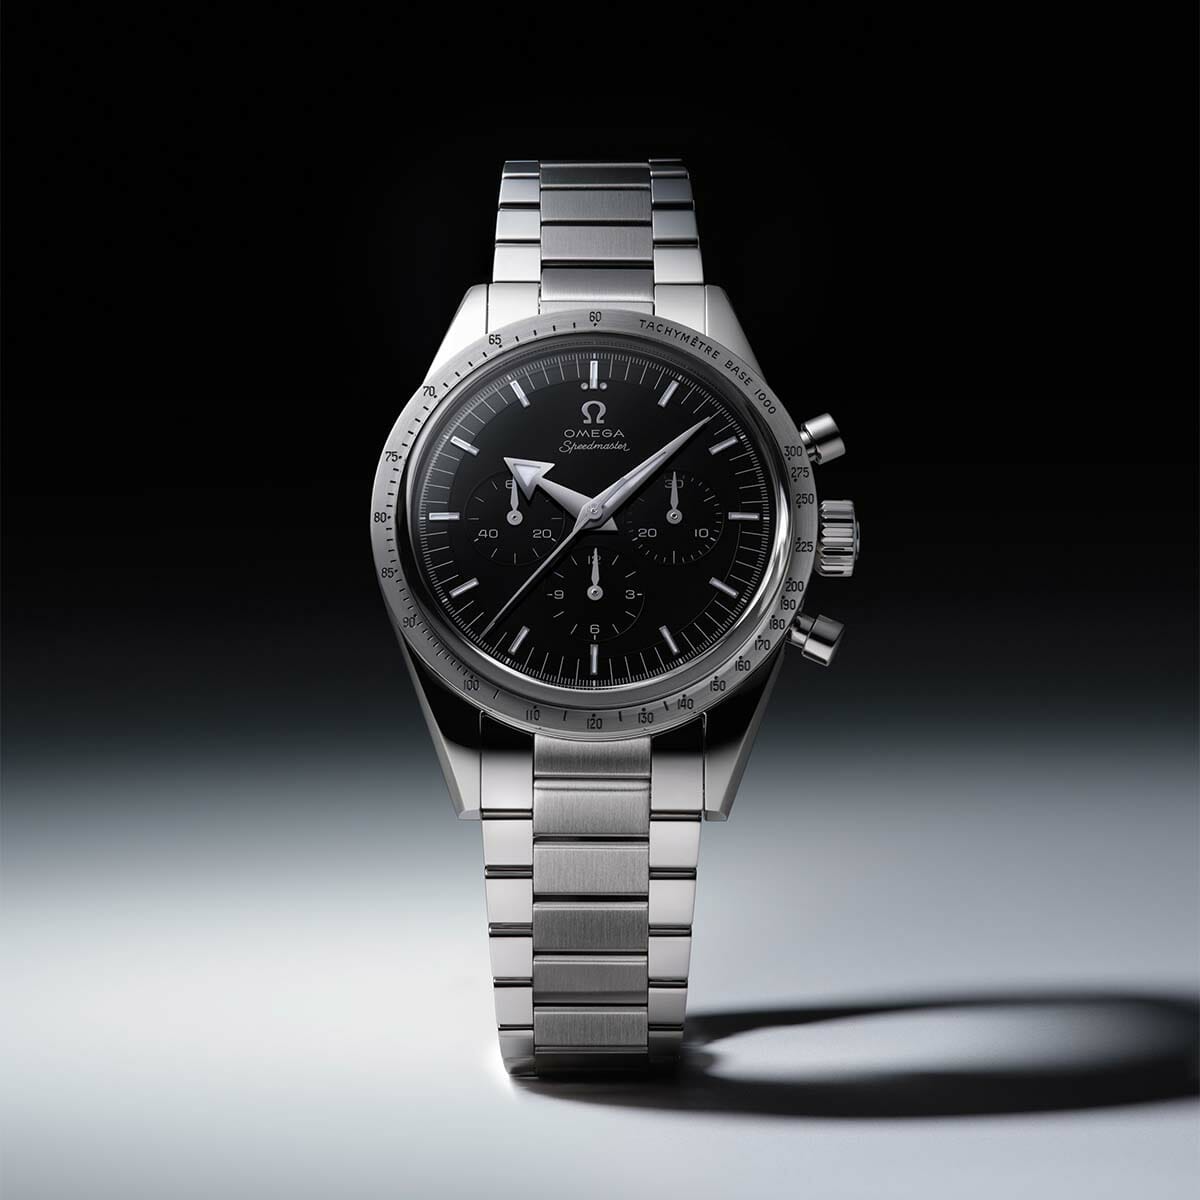 OMEGA begins 2022 with a new Speedmaster